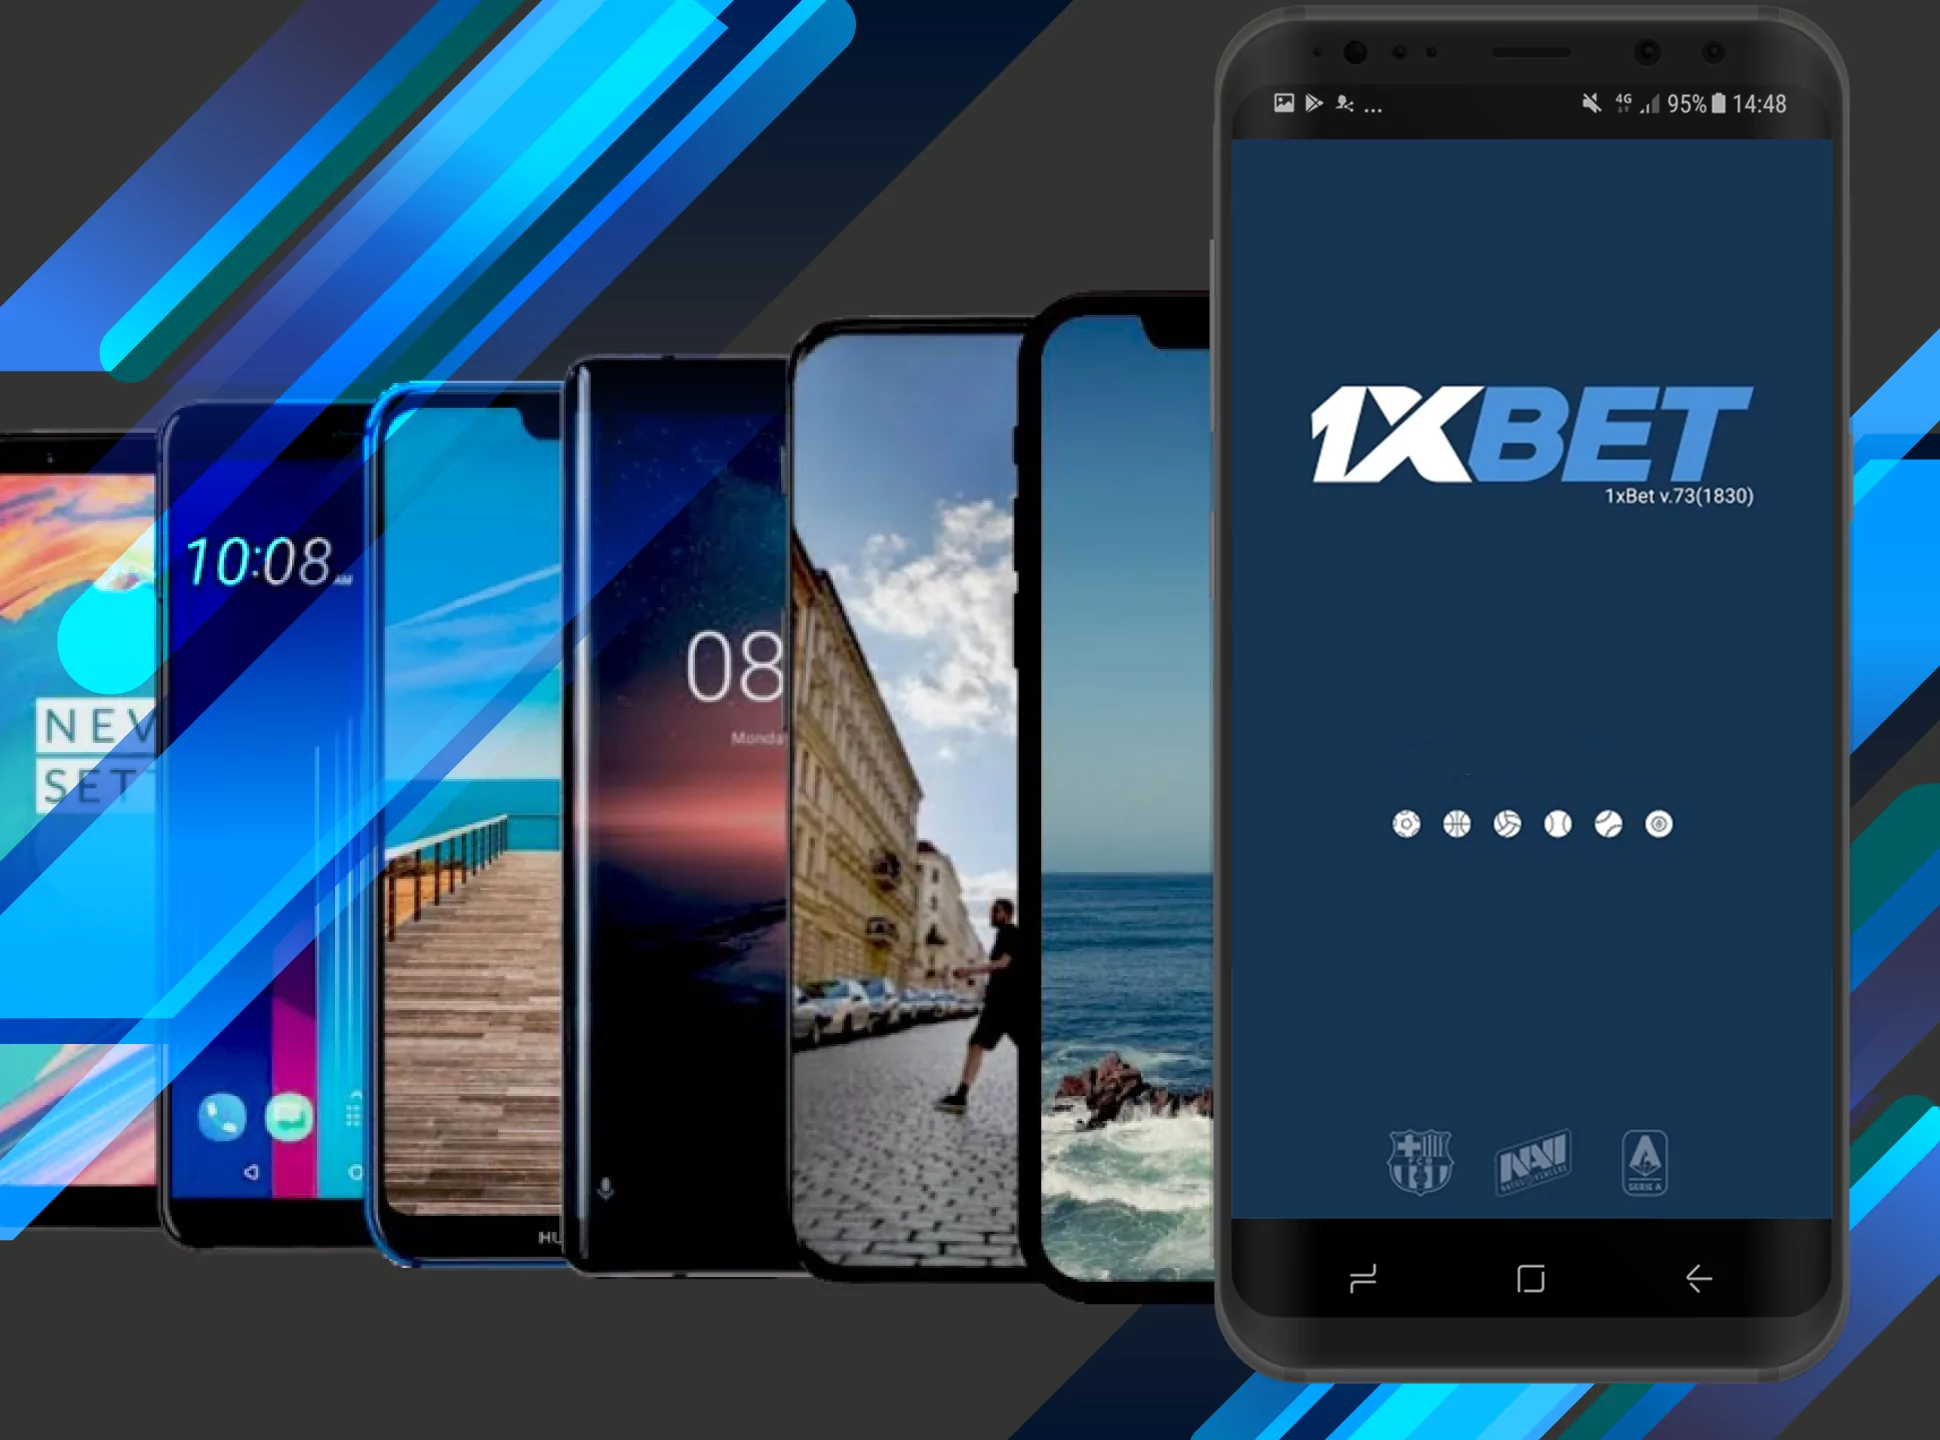 There is a list of devices that can run the 1xBet app.